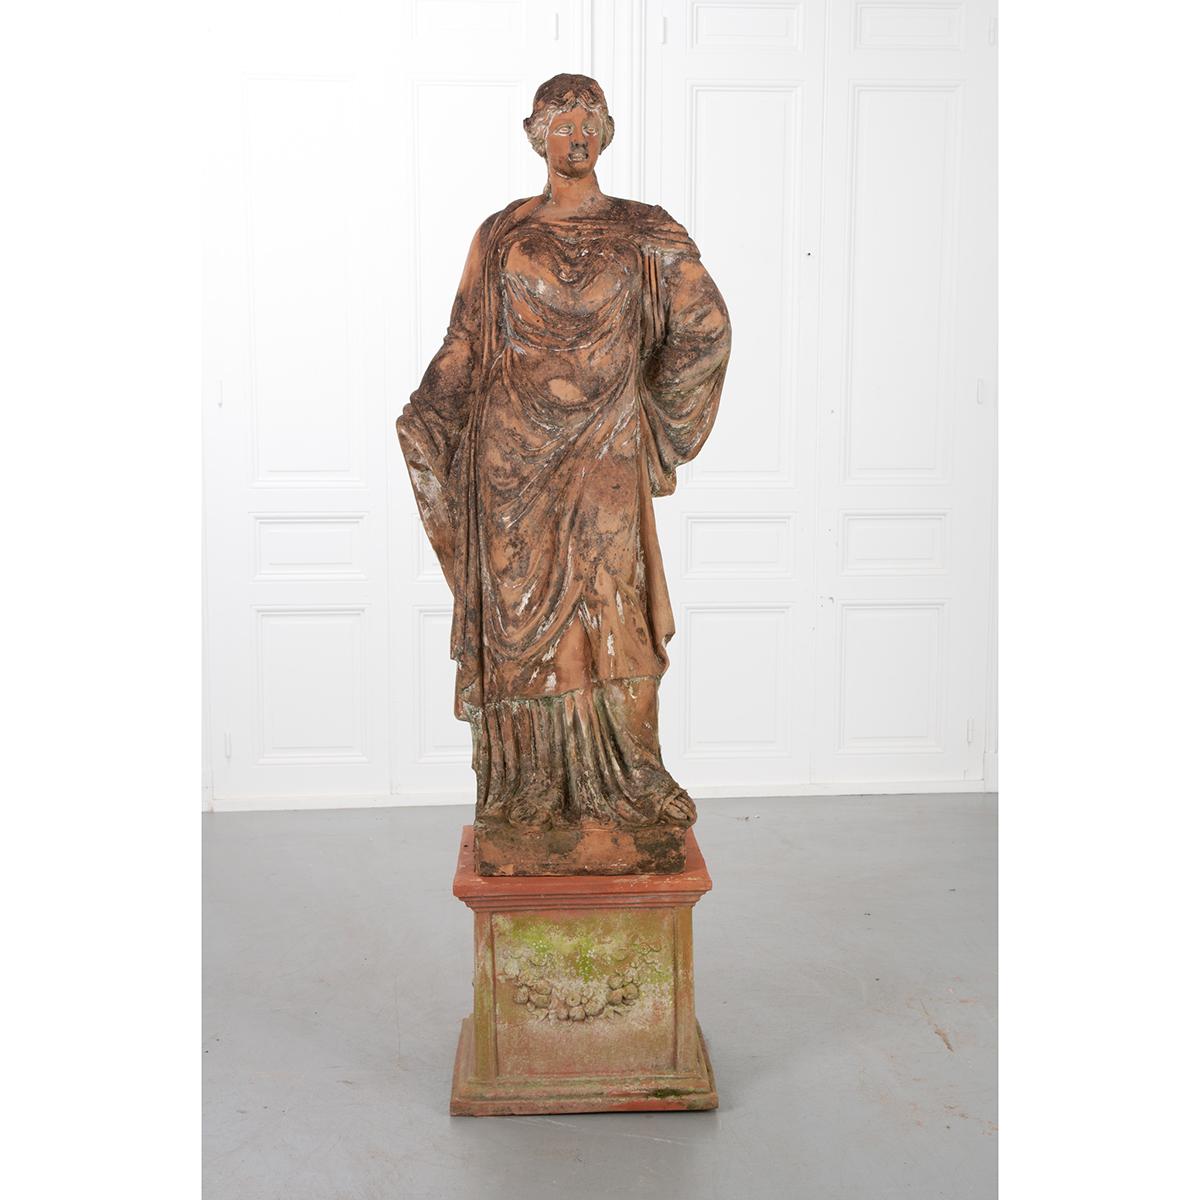 This patinated terracotta statue rests atop a newer pedestal that would work beautifully indoors or outdoors. It depicts a robed female with one hand tucked behind her back and the other hand is missing. The dimensions of the statue alone are: